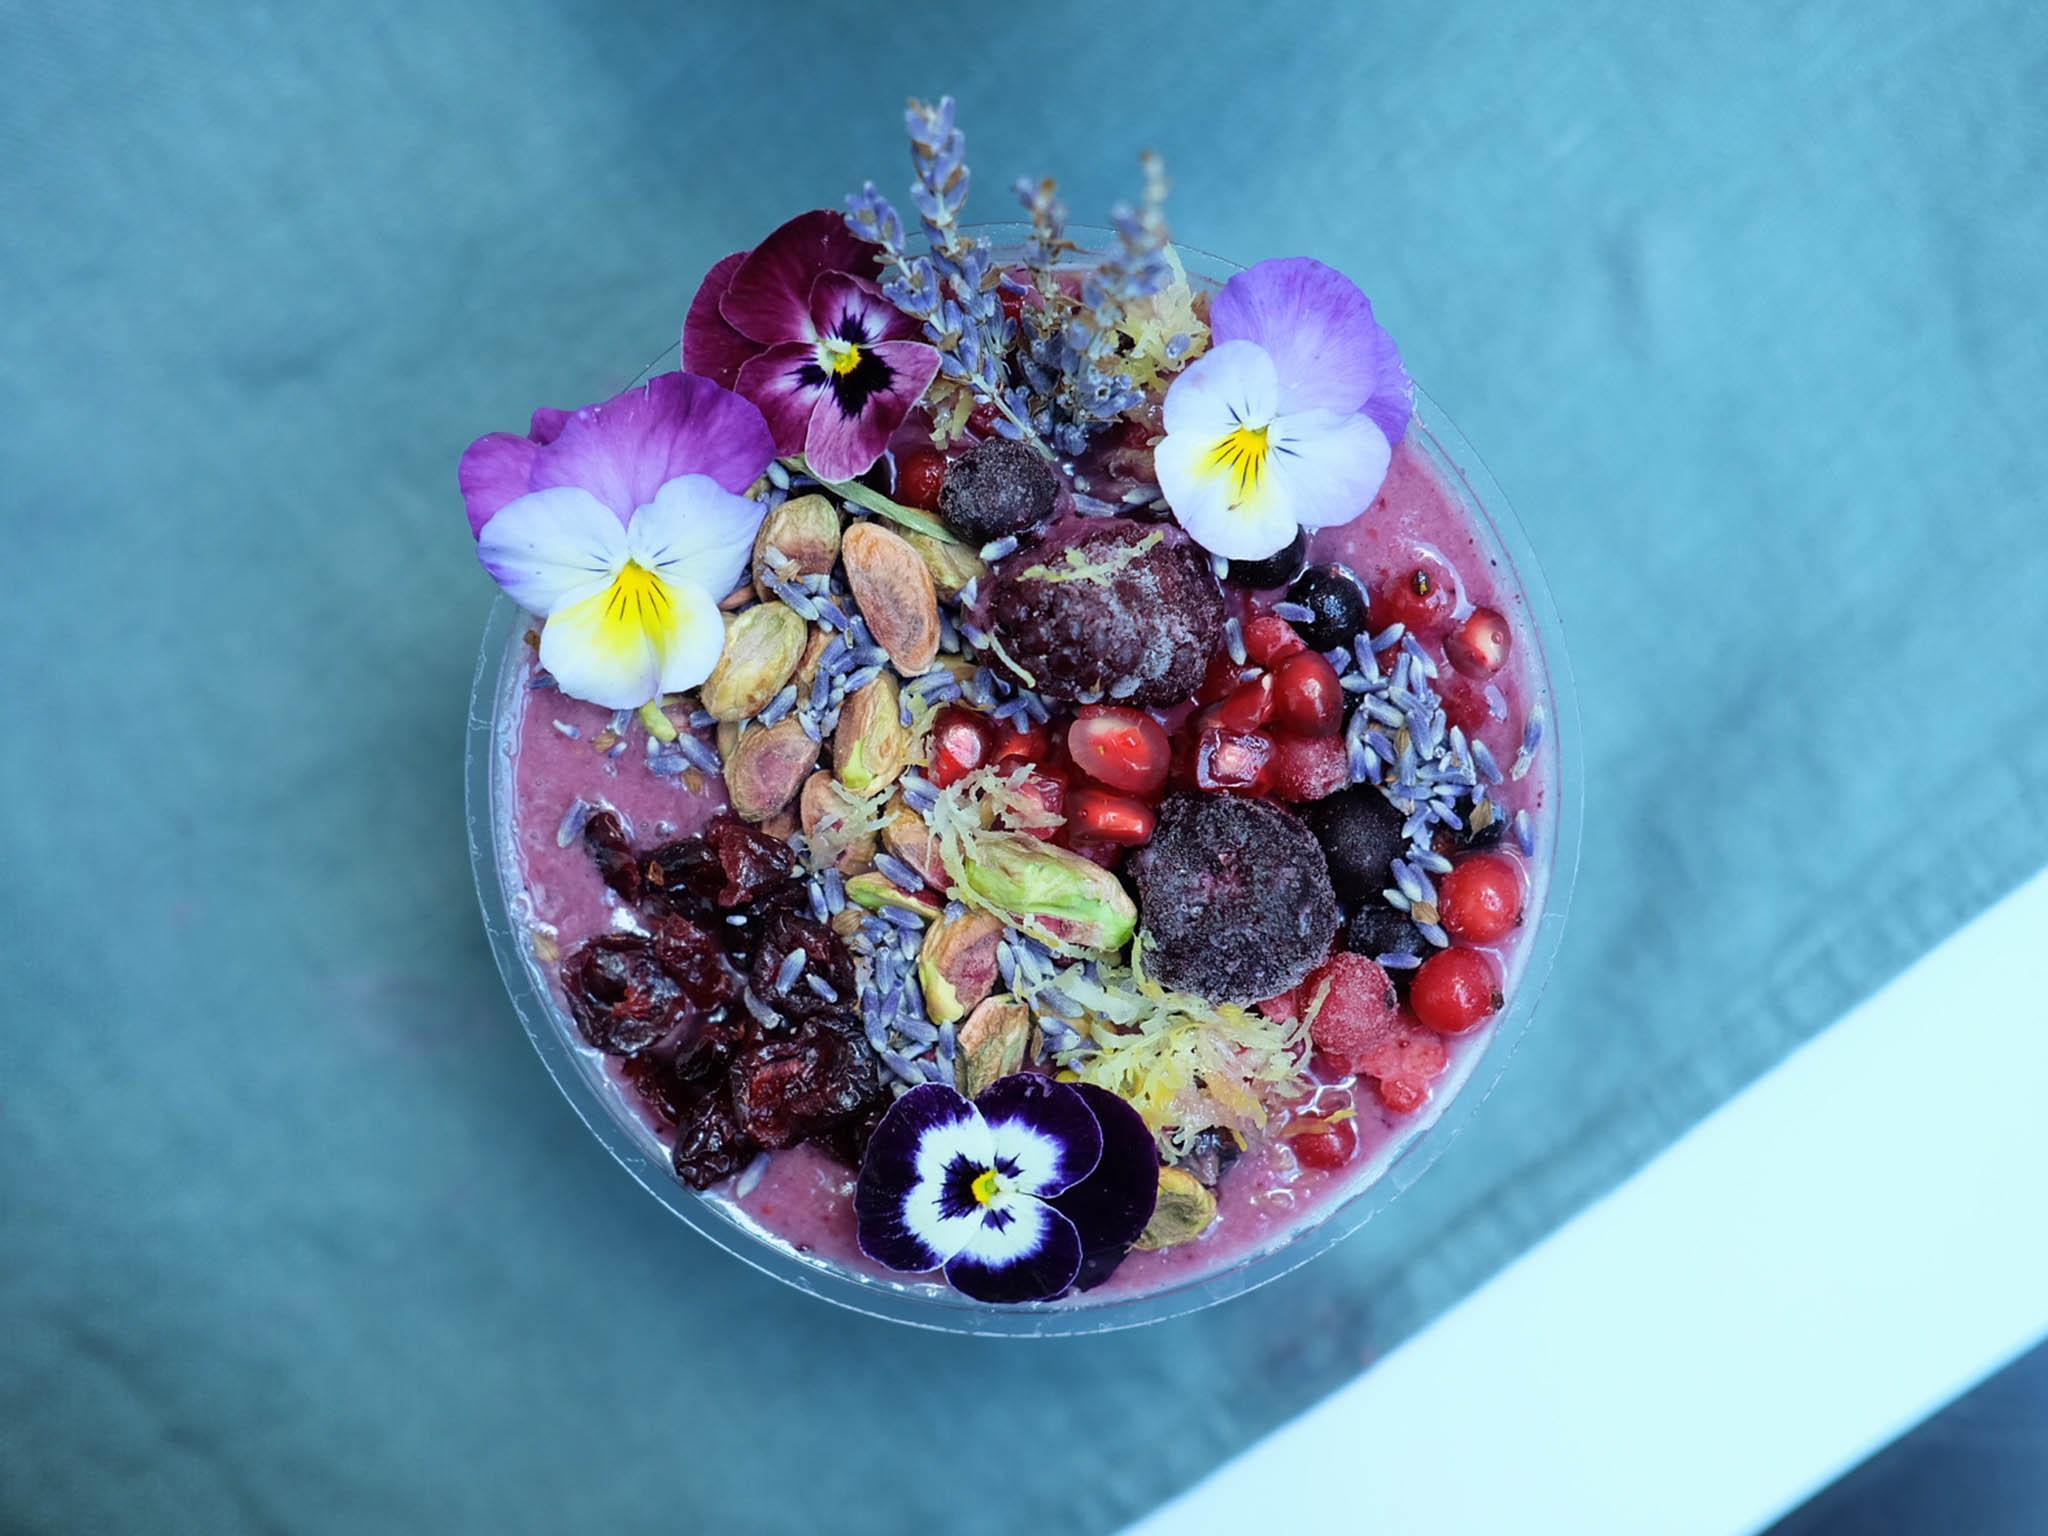 The lavender power smoothie bowl is made with blue matcha, berries, frozen pineapple and almond milk and sprinkled with seasonal toppings